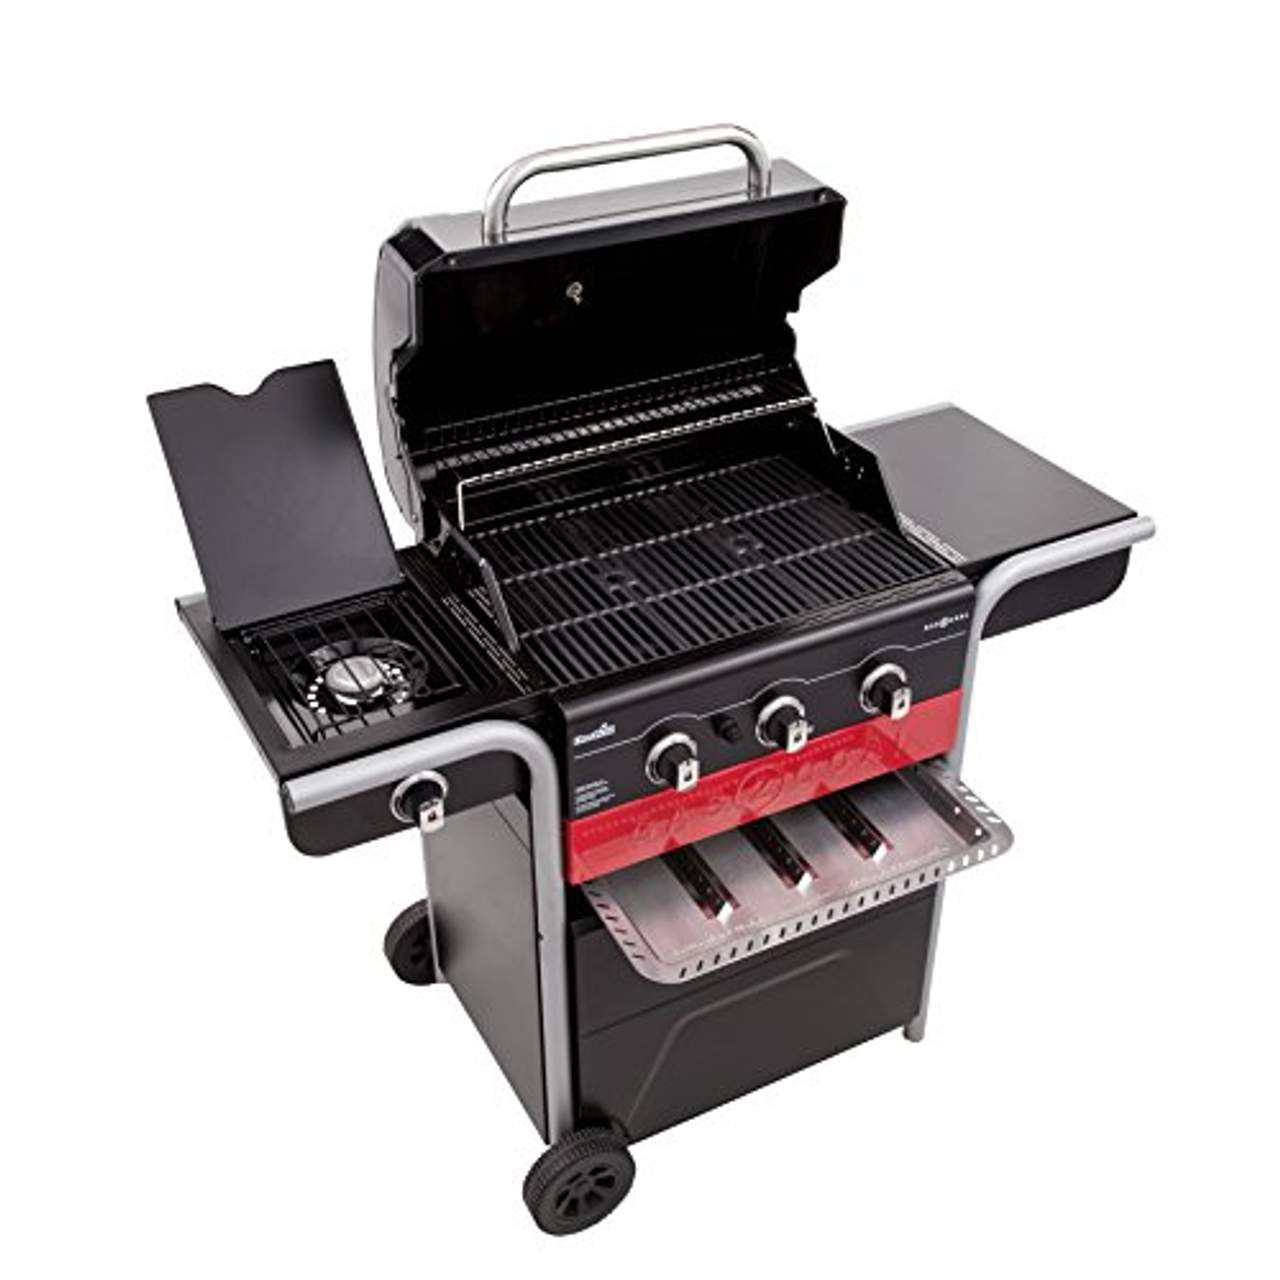 Char-Broil Gas2Coal 330 Hybrid Grill